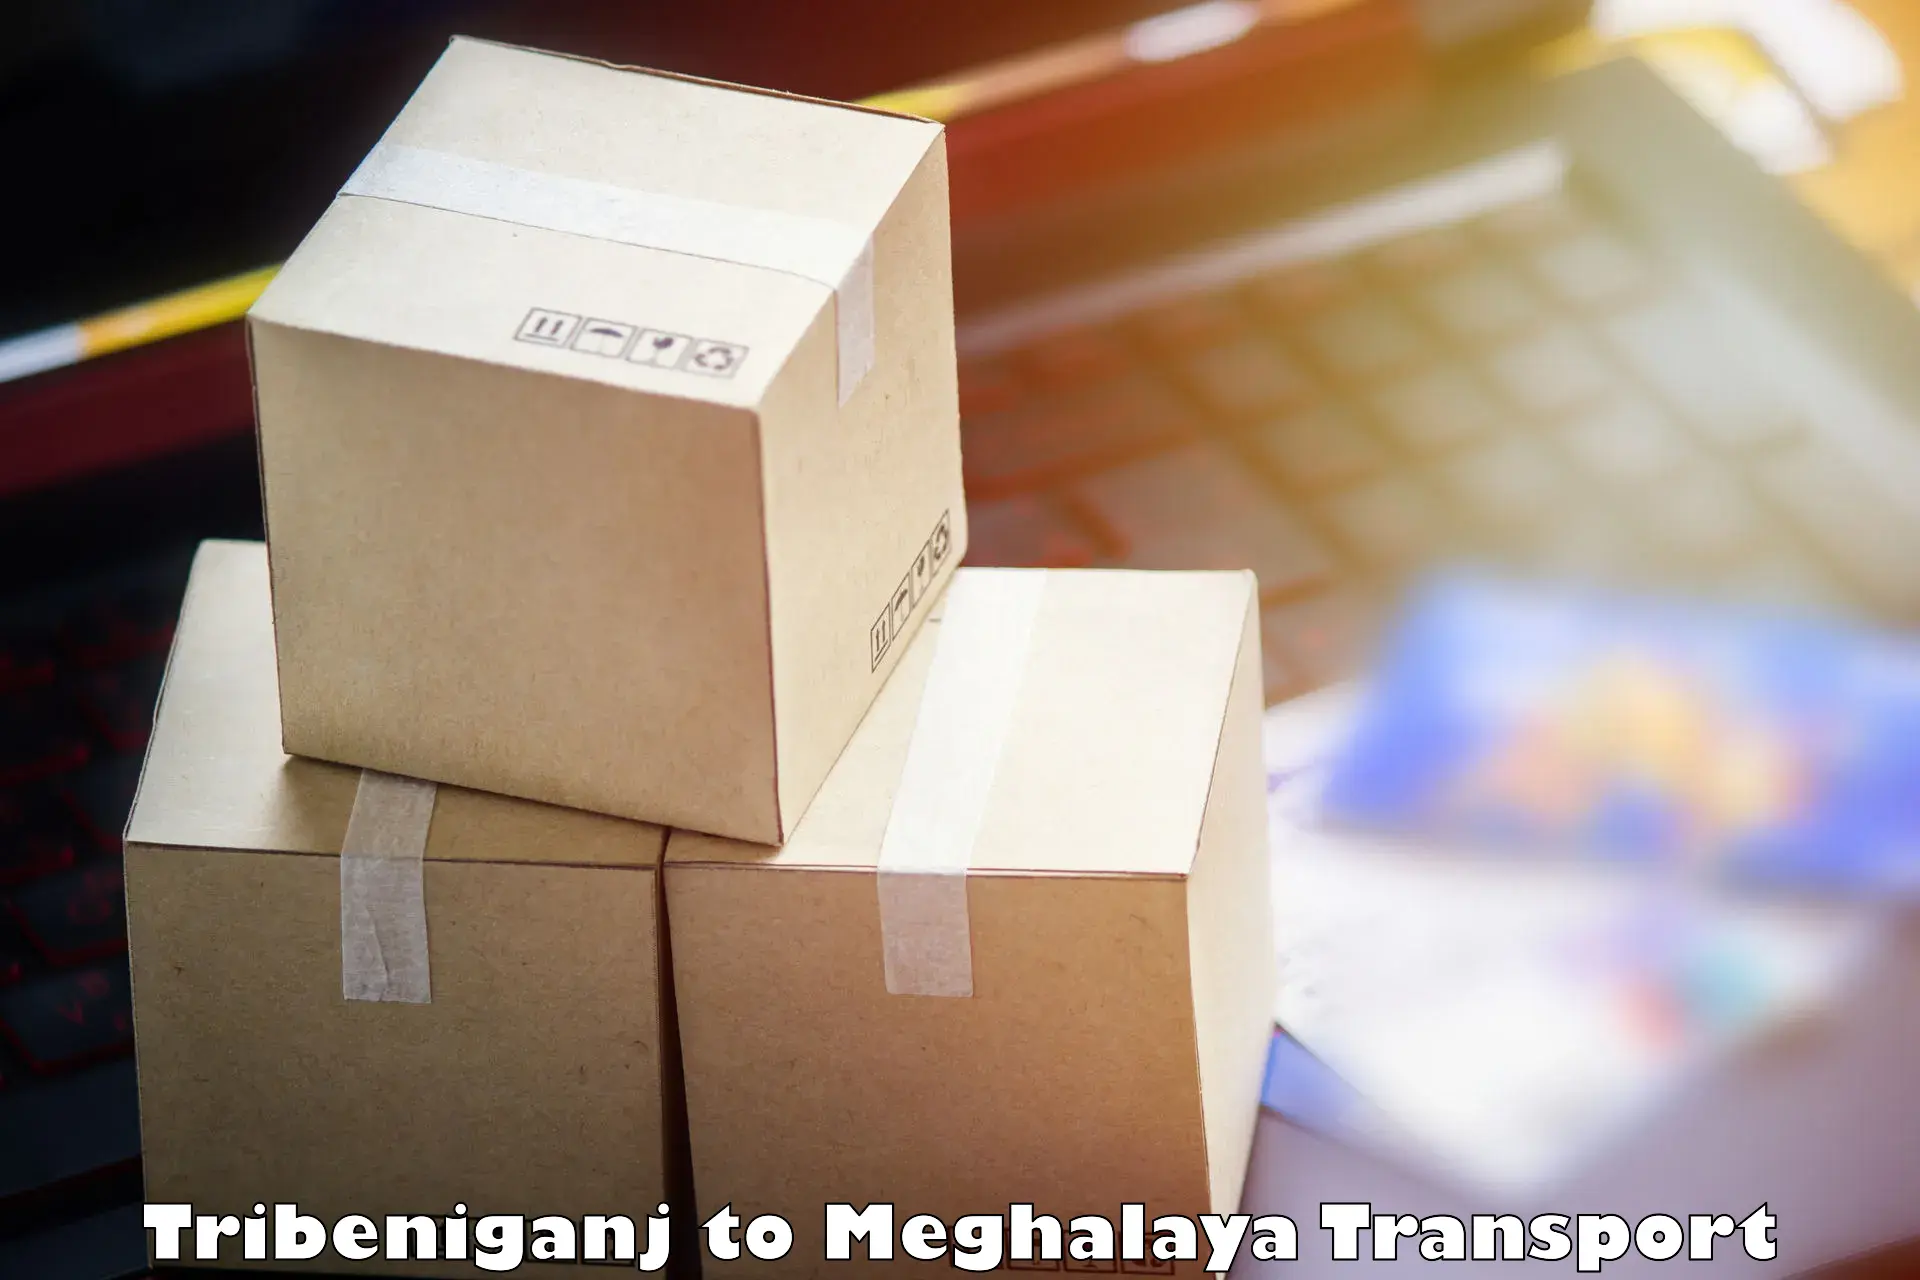 Container transport service Tribeniganj to Nongstoin